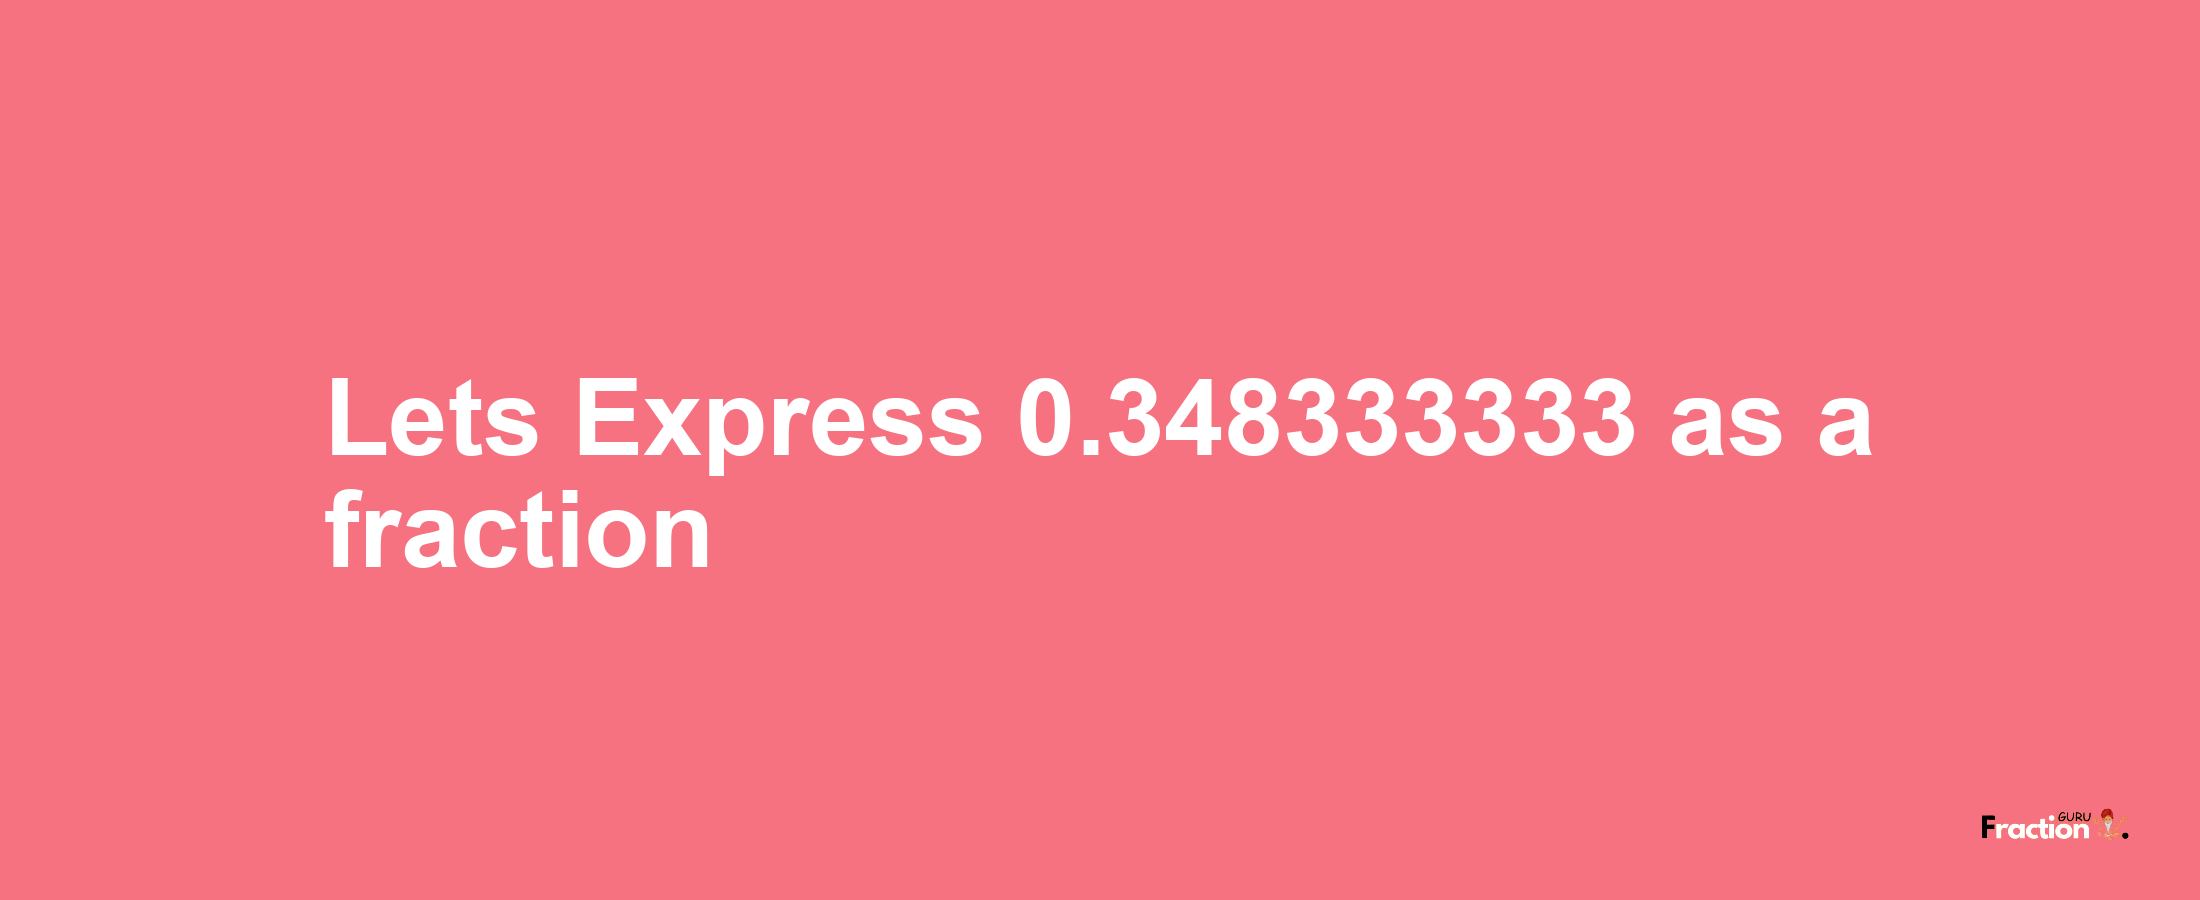 Lets Express 0.348333333 as afraction